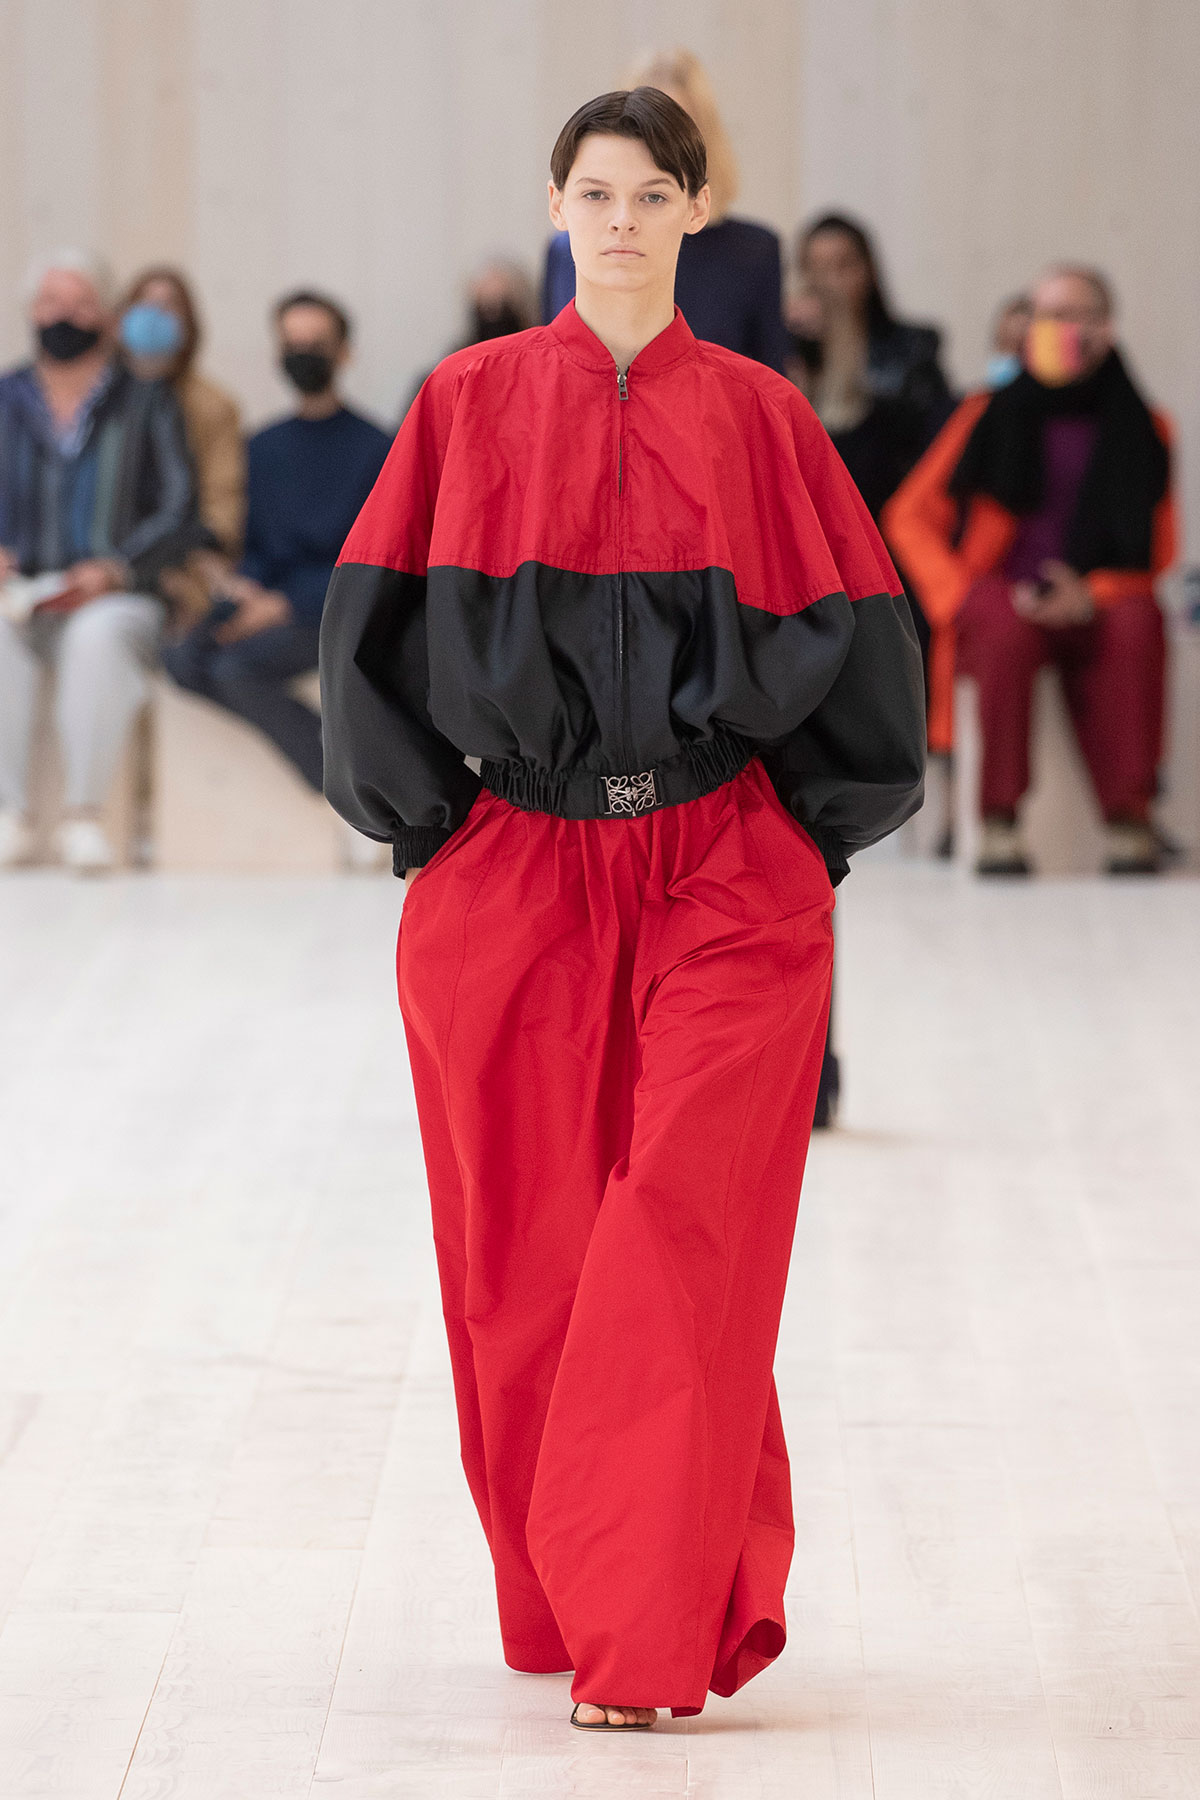 LOEWE Spring Summer 2022 Collection | The Fashionography